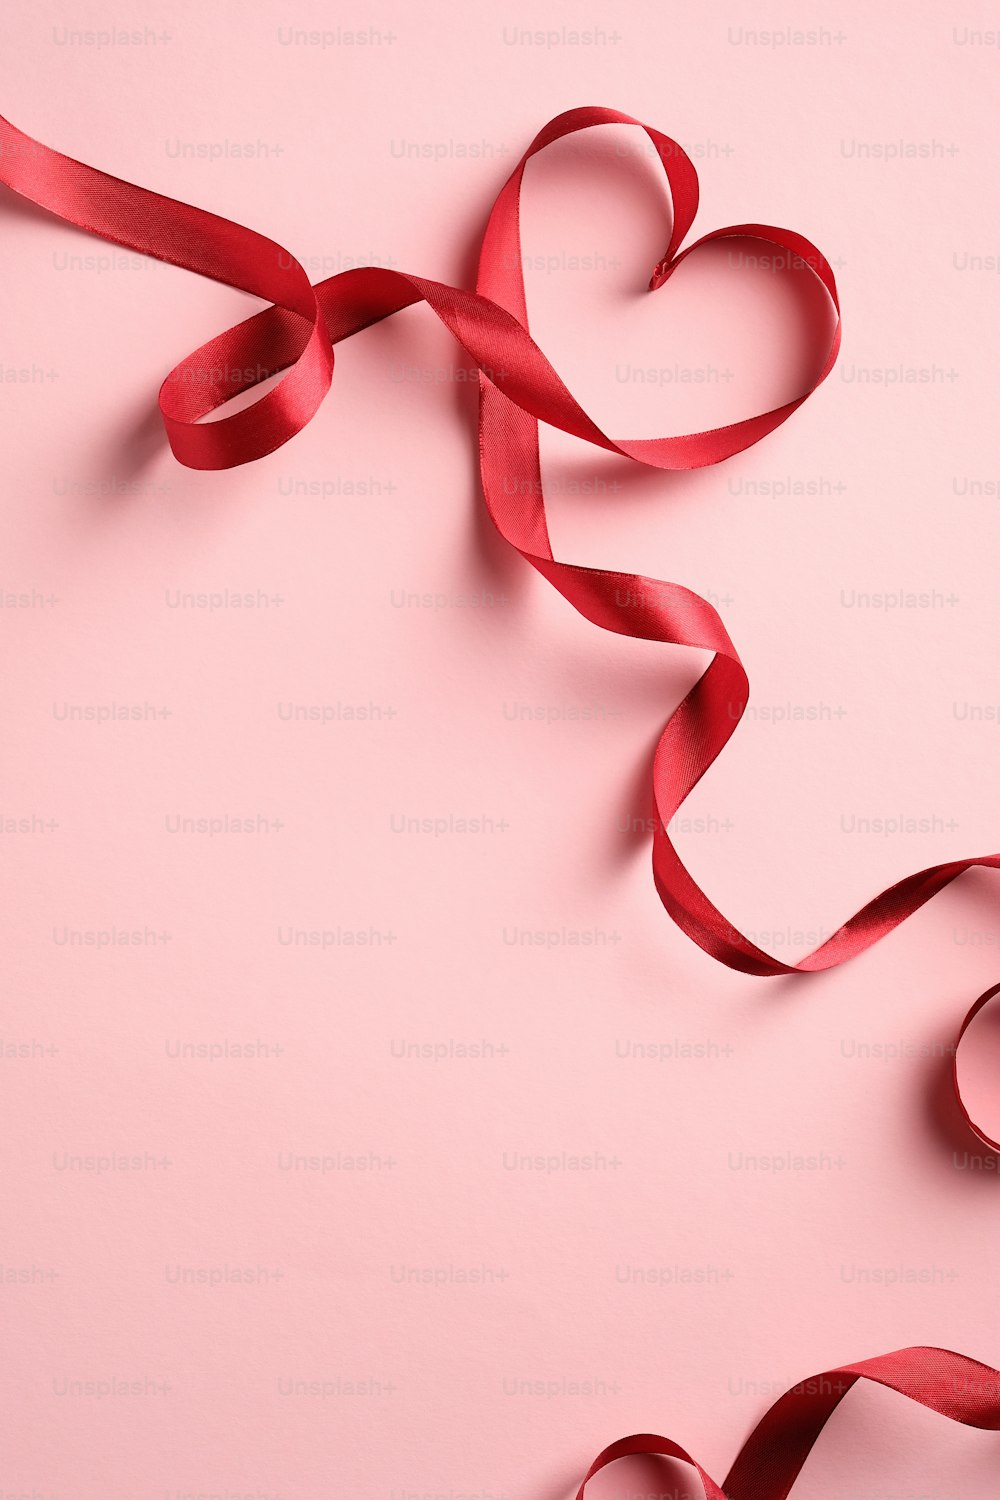 Red Heart shaped ribbon on pink background. Happy Valentine's Day or Mother's Day concept.